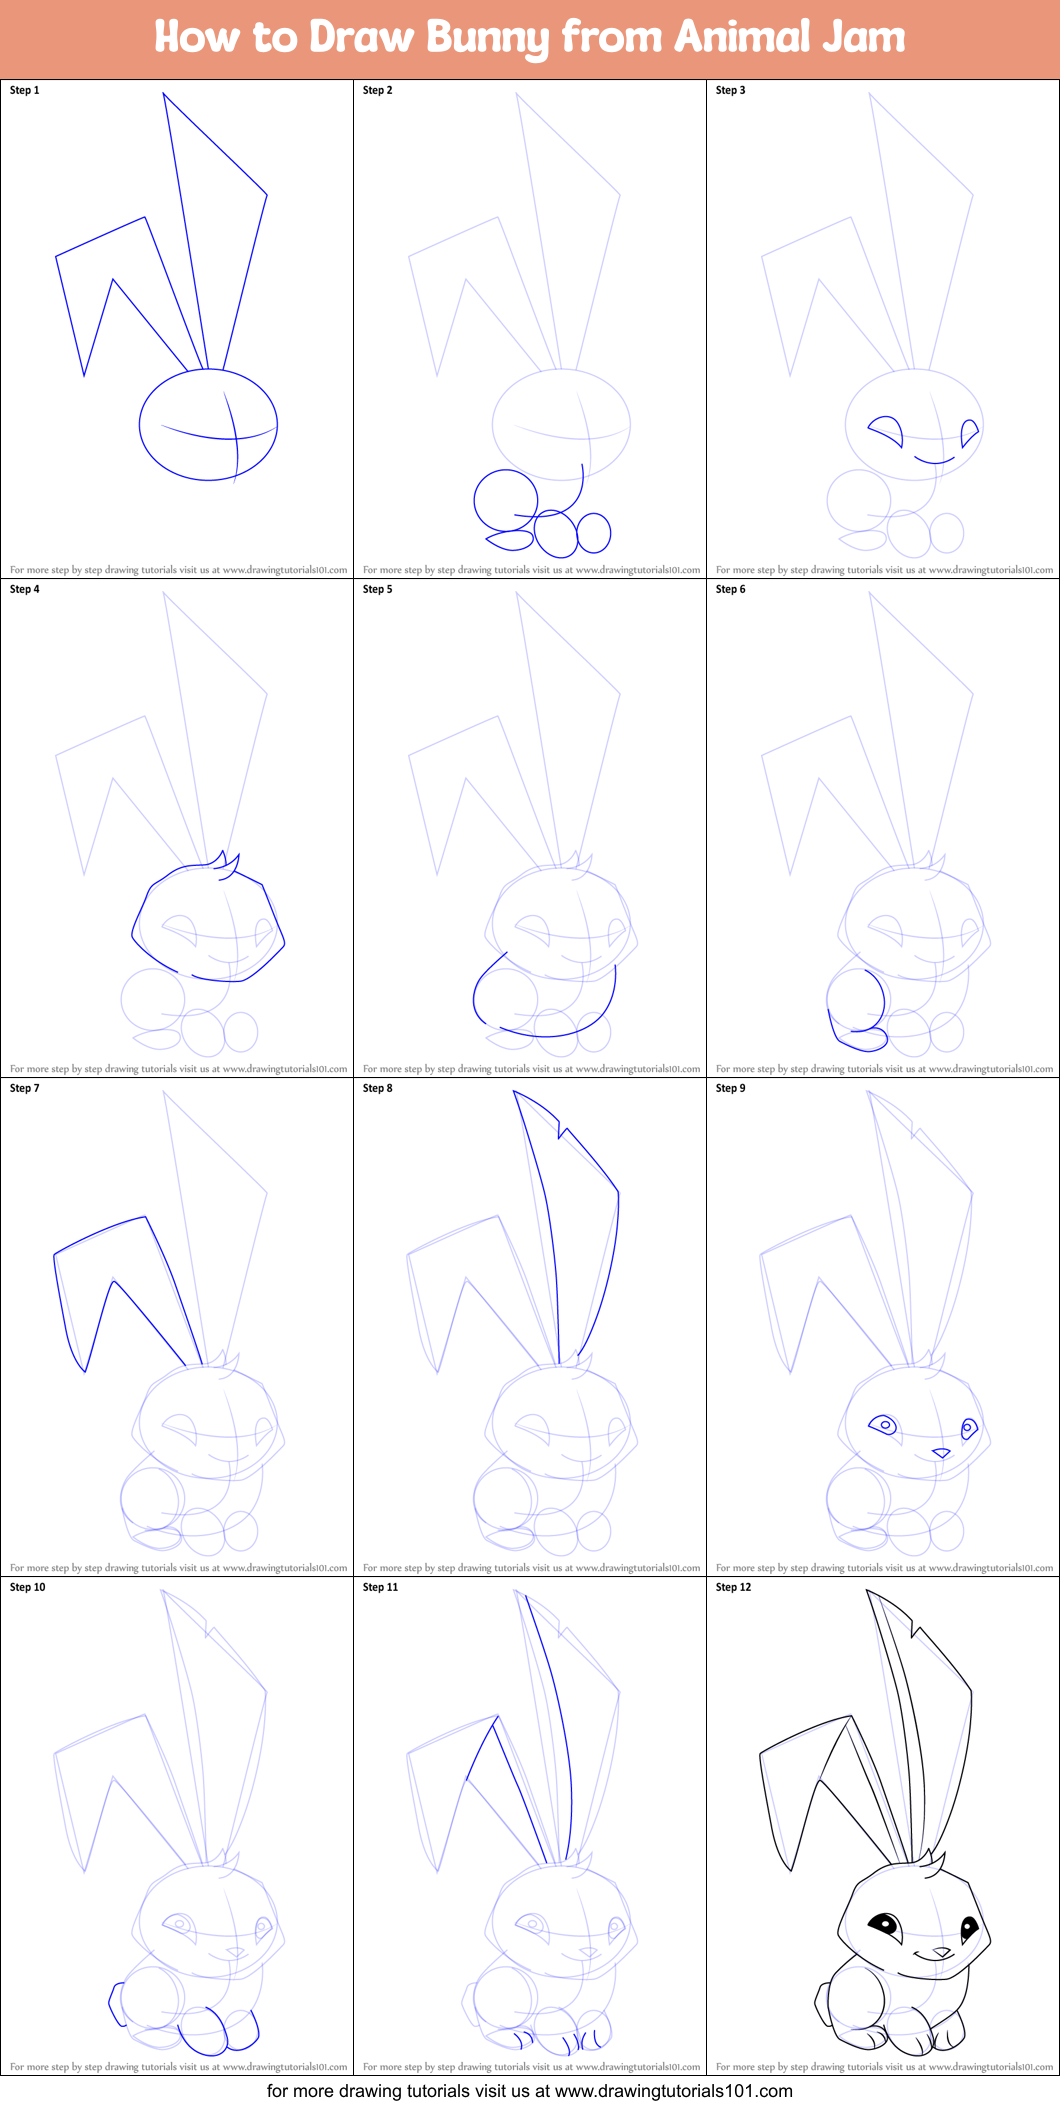 How to Draw Bunny from Animal Jam printable step by step drawing sheet